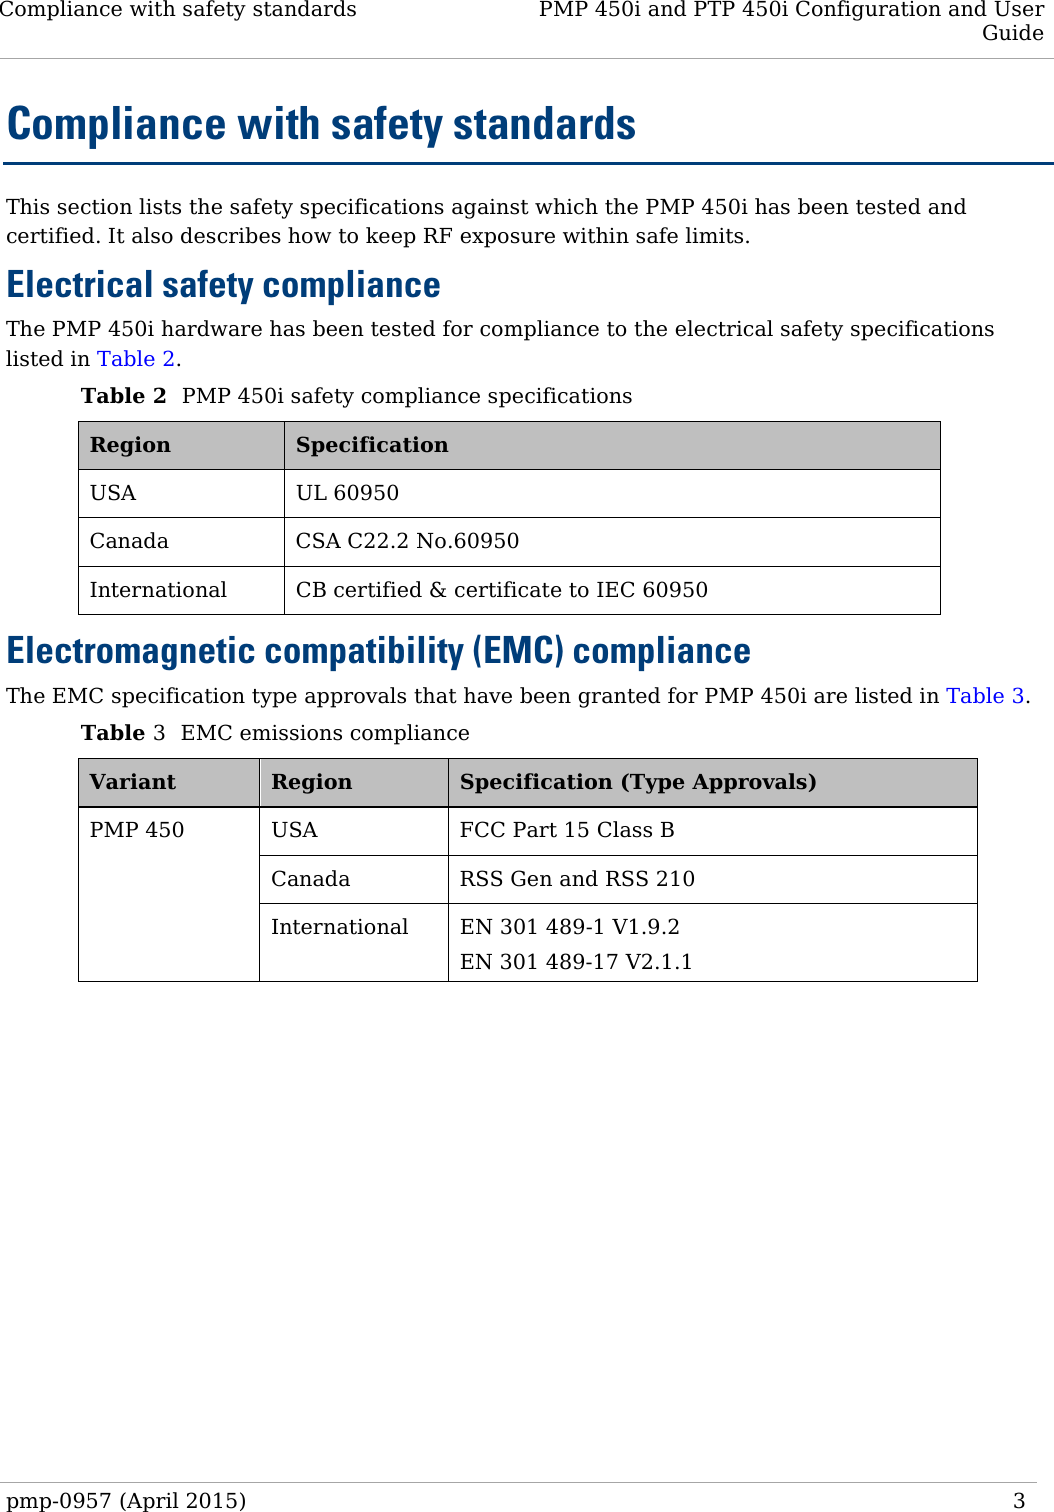 Compliance with safety standards PMP 450i and PTP 450i Configuration and User Guide  Compliance with safety standards This section lists the safety specifications against which the PMP 450i has been tested and certified. It also describes how to keep RF exposure within safe limits. Electrical safety compliance  The PMP 450i hardware has been tested for compliance to the electrical safety specifications listed in Table 2. Table 2  PMP 450i safety compliance specifications Region  Specification USA UL 60950 Canada CSA C22.2 No.60950 International CB certified &amp; certificate to IEC 60950 Electromagnetic compatibility (EMC) compliance The EMC specification type approvals that have been granted for PMP 450i are listed in Table 3. Table 3  EMC emissions compliance Variant  Region  Specification (Type Approvals) PMP 450 USA FCC Part 15 Class B Canada RSS Gen and RSS 210 International EN 301 489-1 V1.9.2 EN 301 489-17 V2.1.1   pmp-0957 (April 2015)   3  